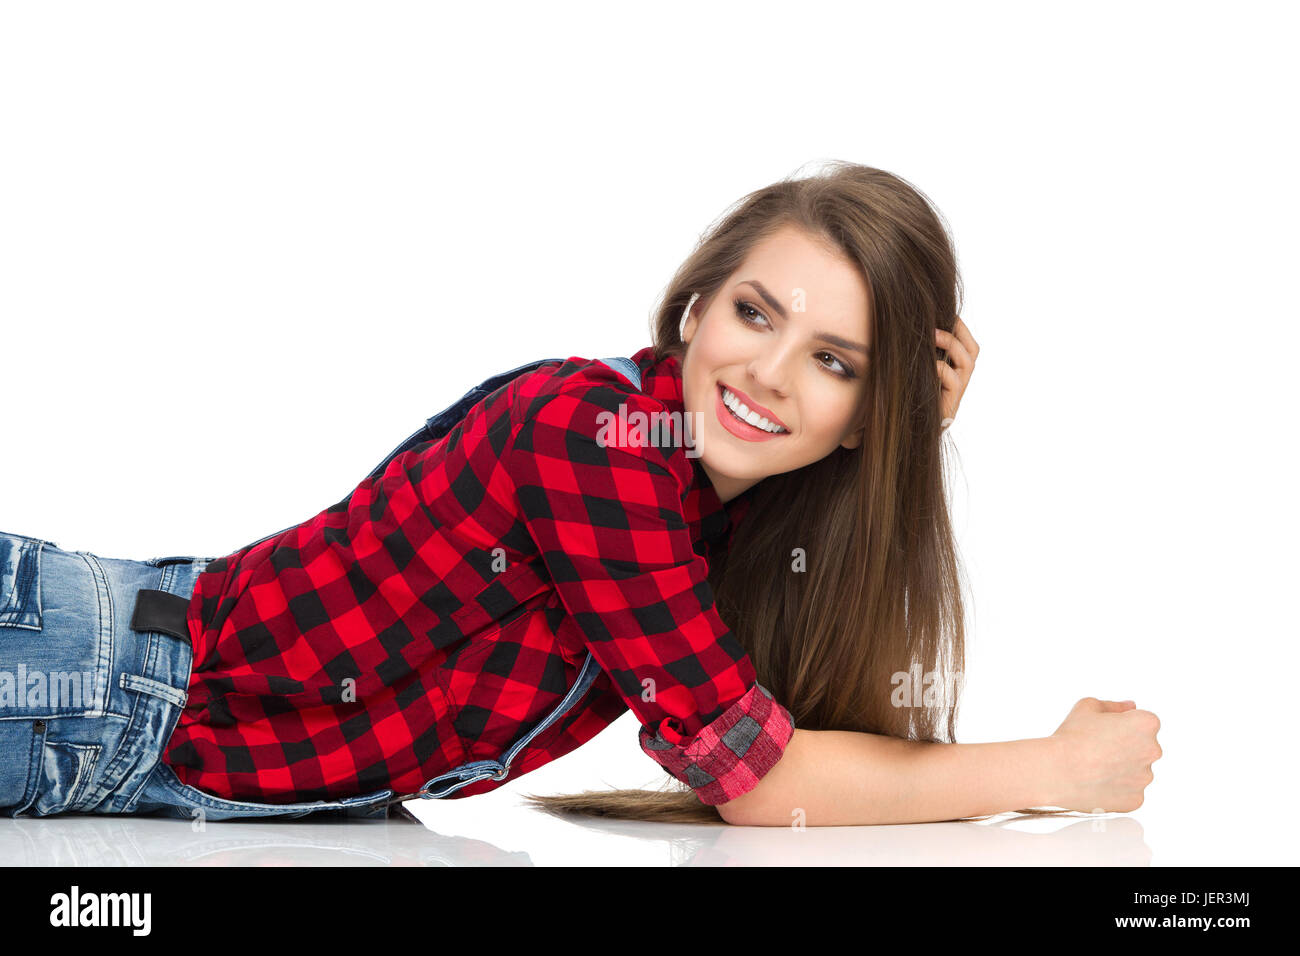 Smiling young woman in red lumberjack shirt and jeans  lying down on a floor and looking away. Waist up studio shot isolated on white. Stock Photo